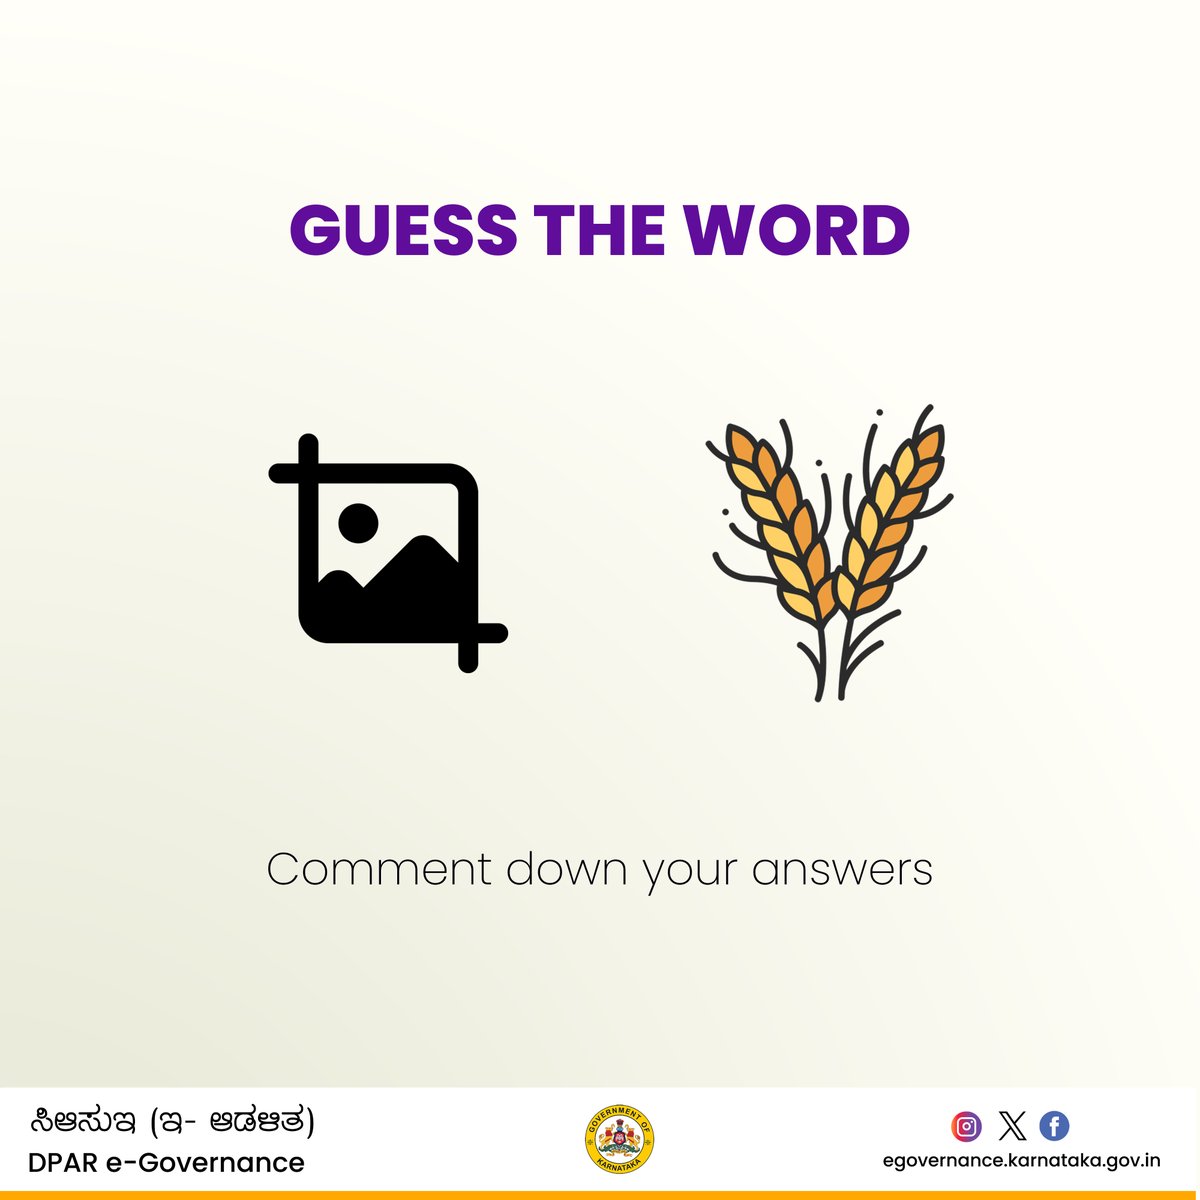 GUESS THE WORD??

With the reference of the given images, find the homonym word.

#guesstheword